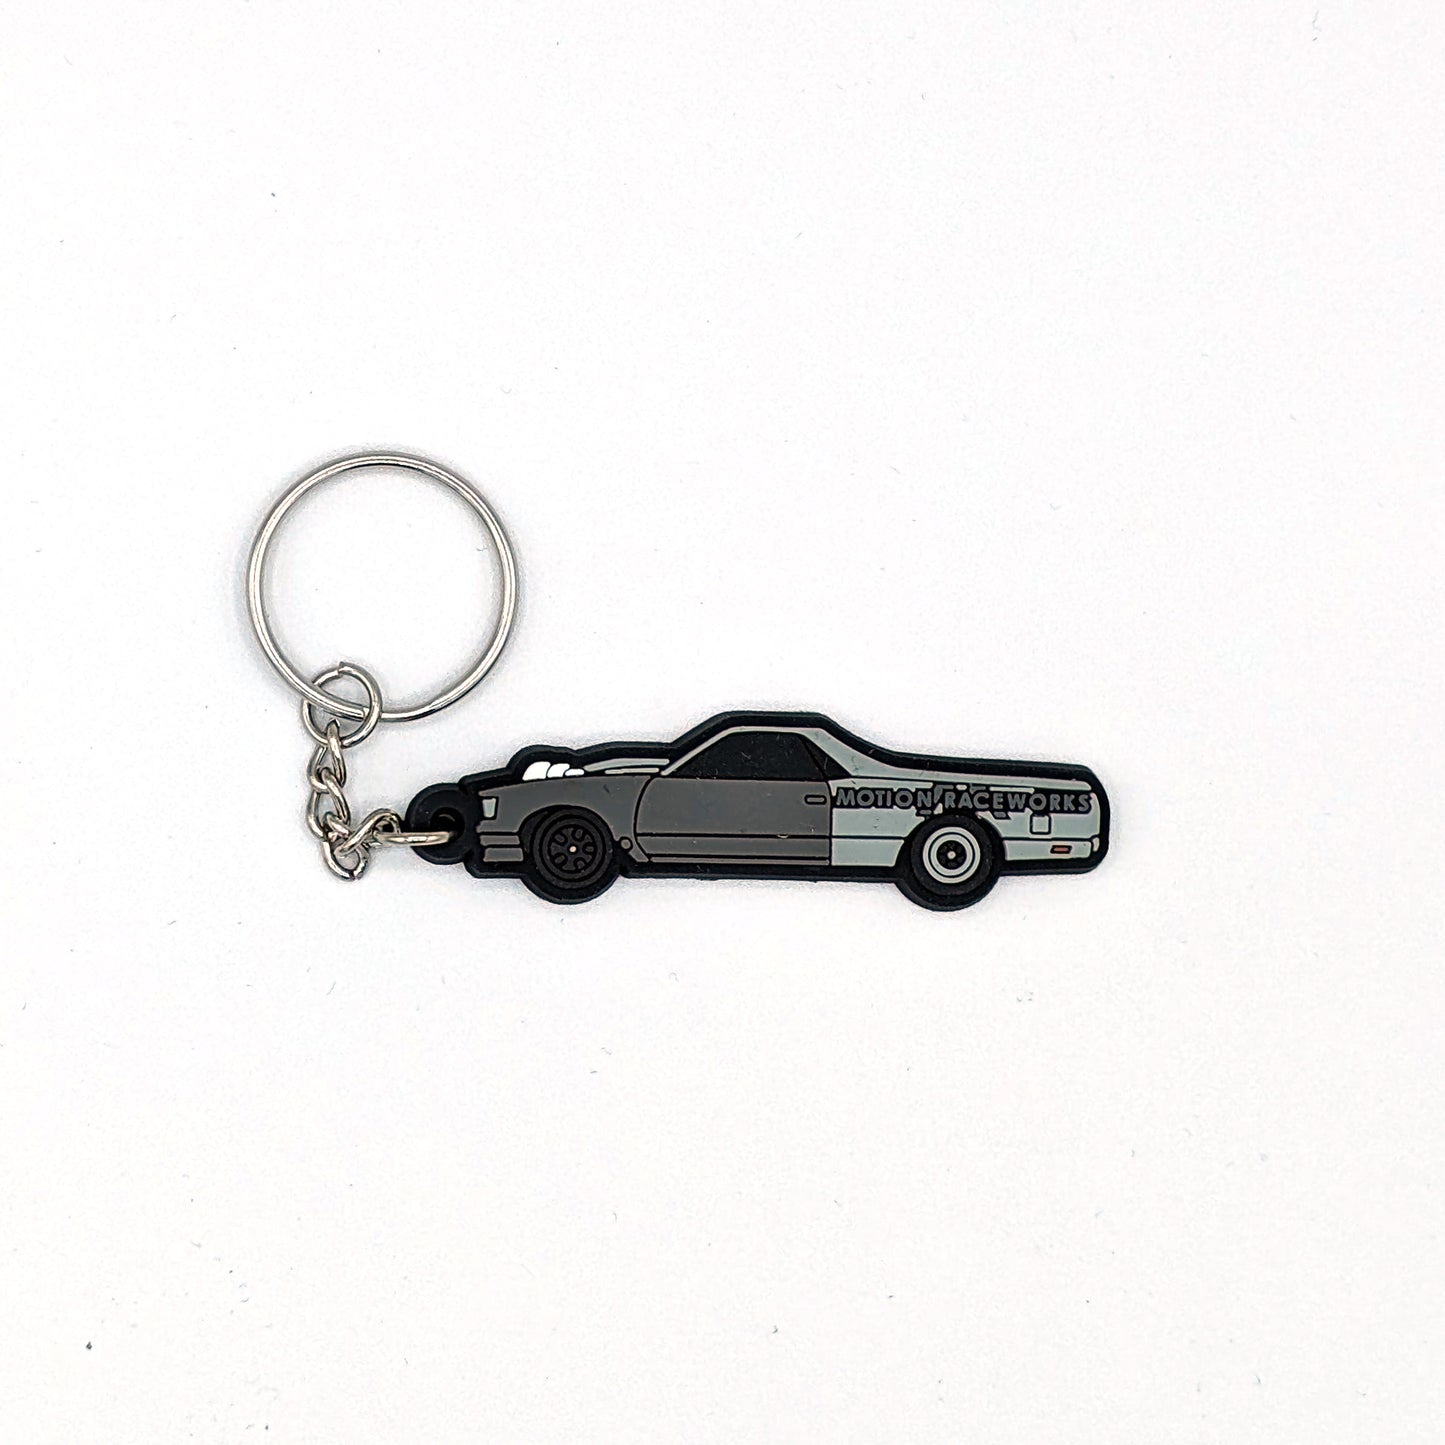 Mullet Key Chain